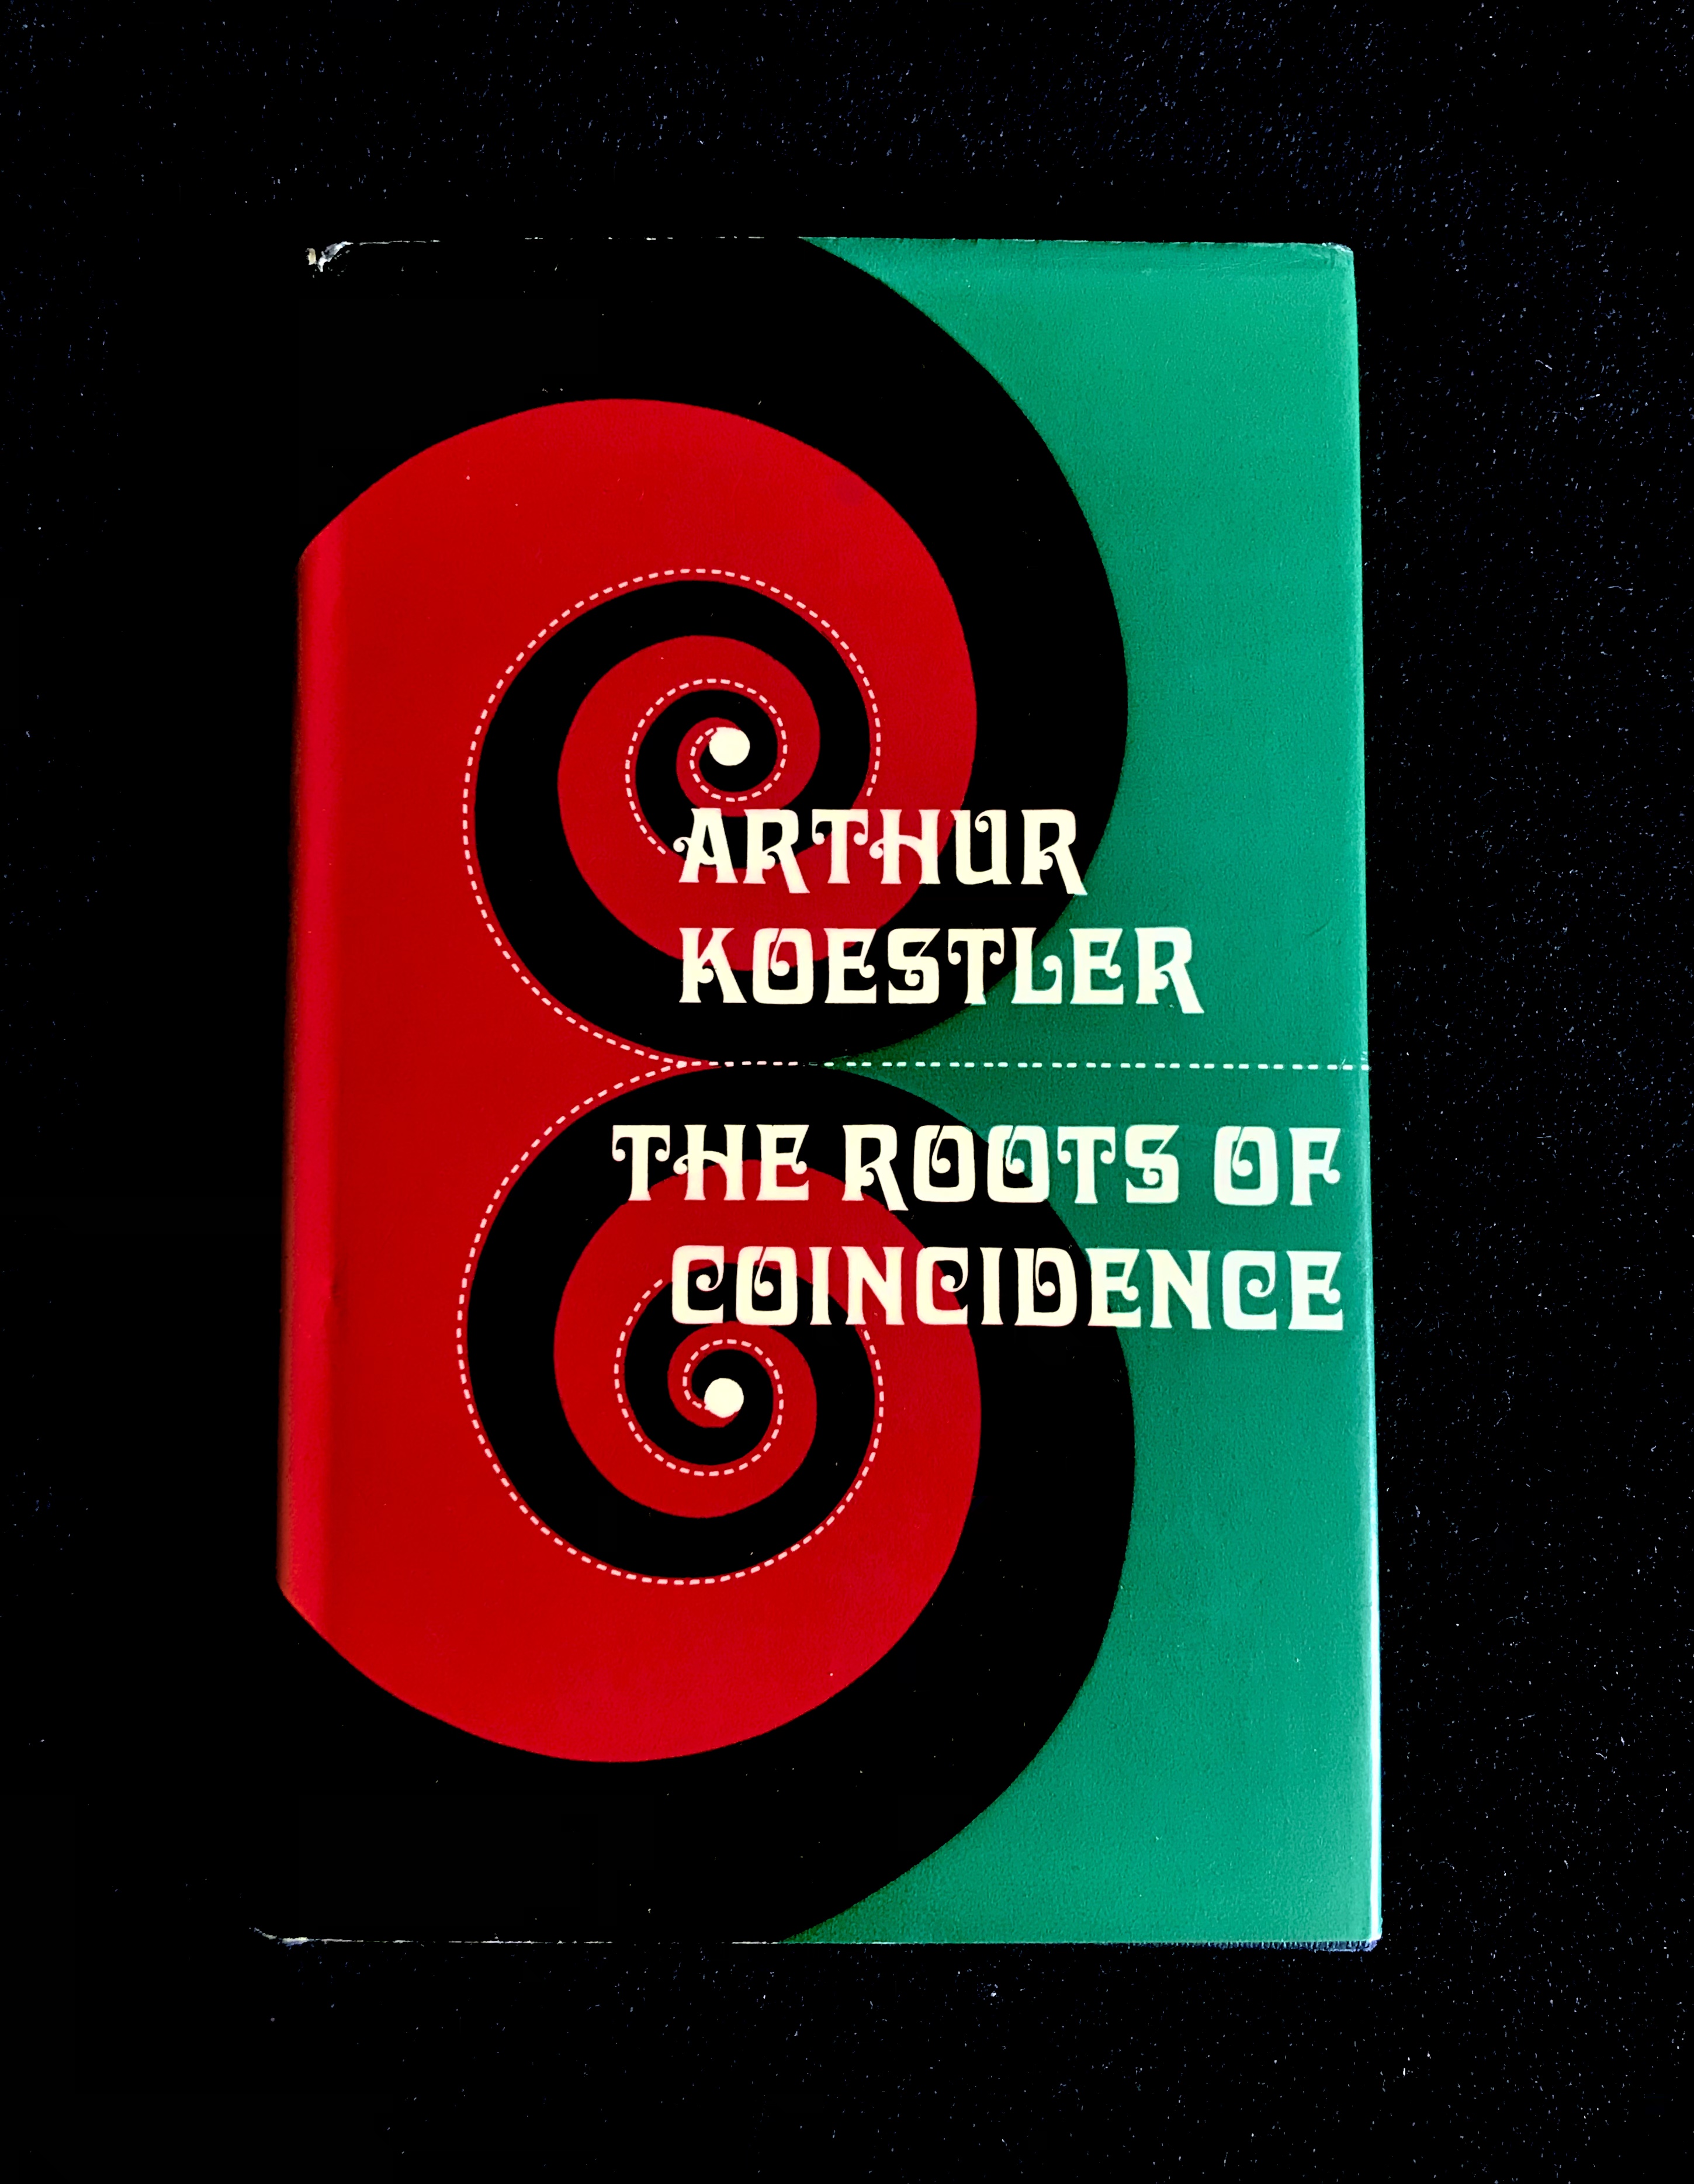 The Roots Of Coincidence by Arthur Koestler